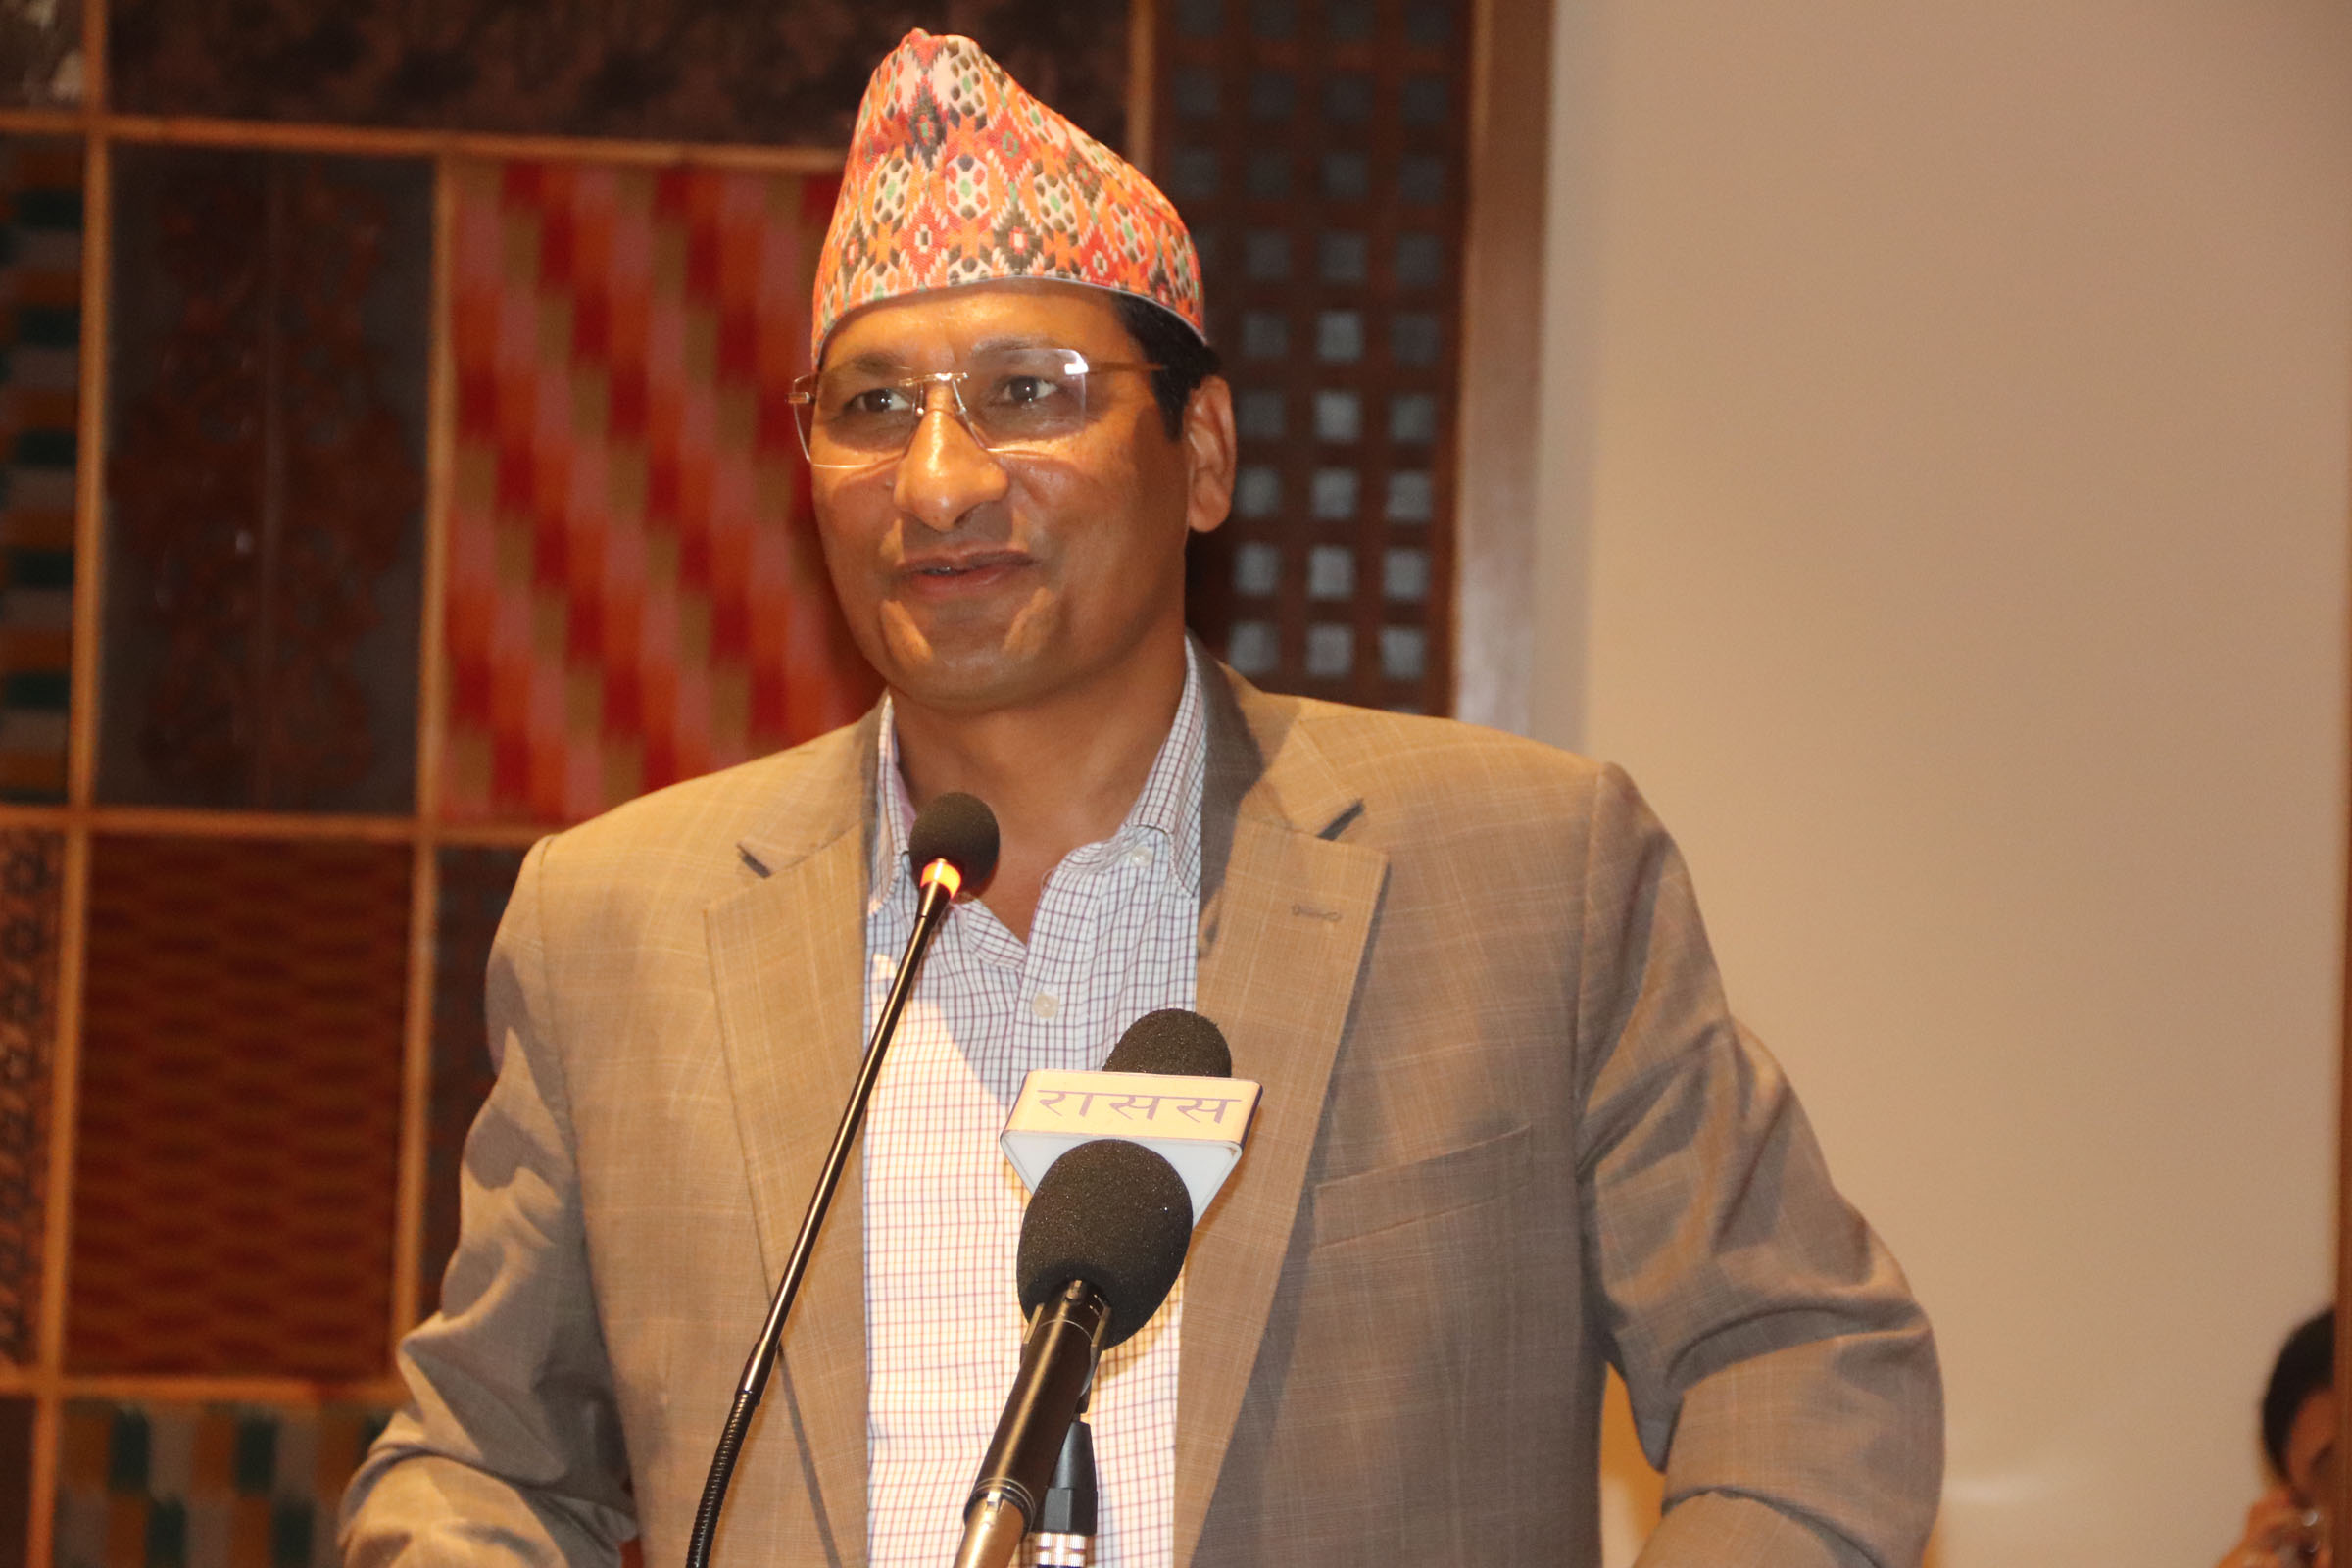 Exhibition on EV and electronic appliances kicks off, Minister Basnet pledges to further promote EV